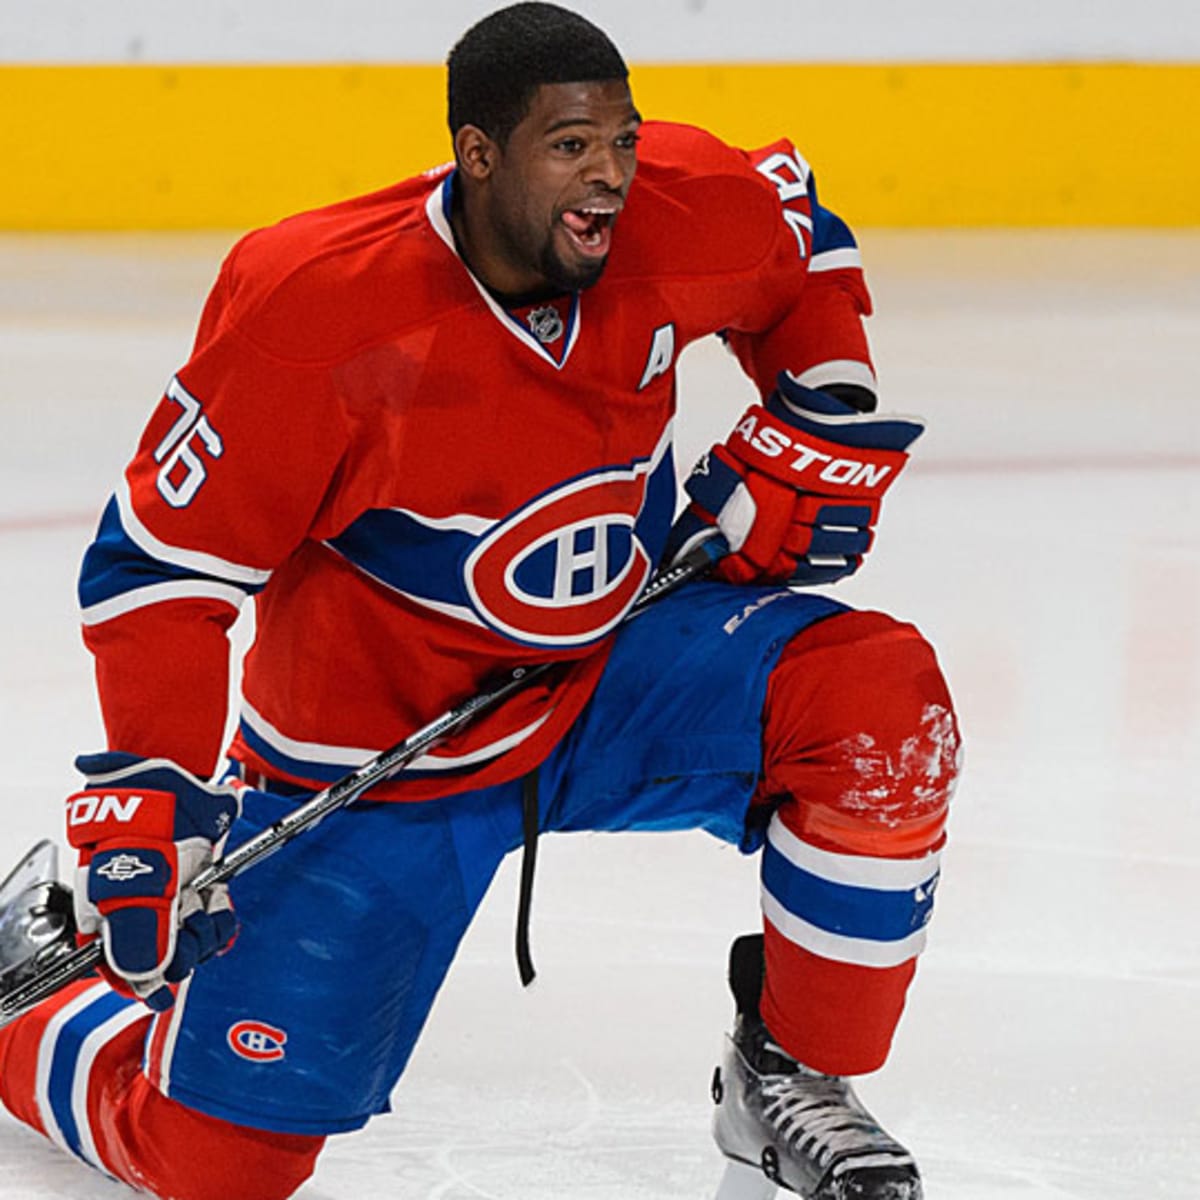 When PK Subban said he couldn't sleep after his brother received racial  slurs from another hockey player